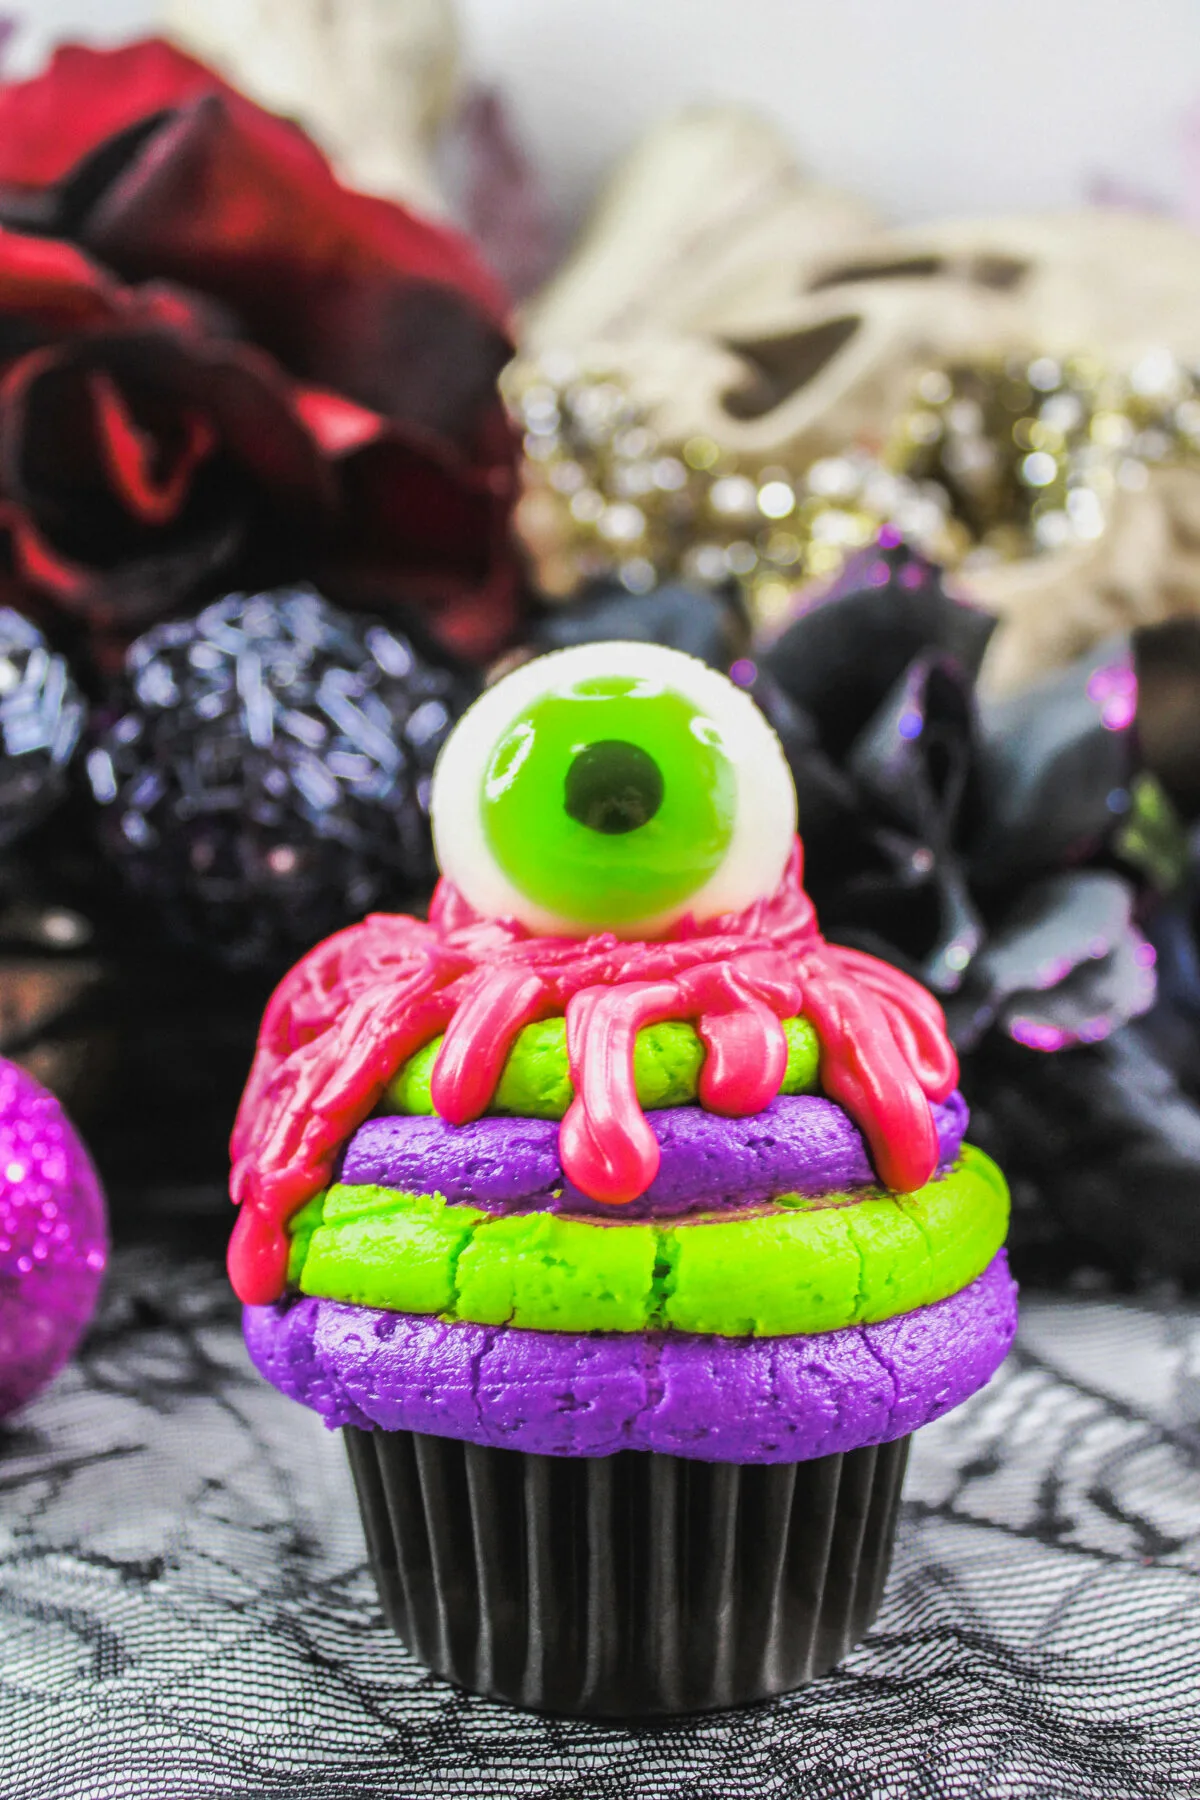 These spooky, bloody eyeball cupcakes are perfect for your next Halloween party! These easy to make ghoulish goodies can be ready in no time!